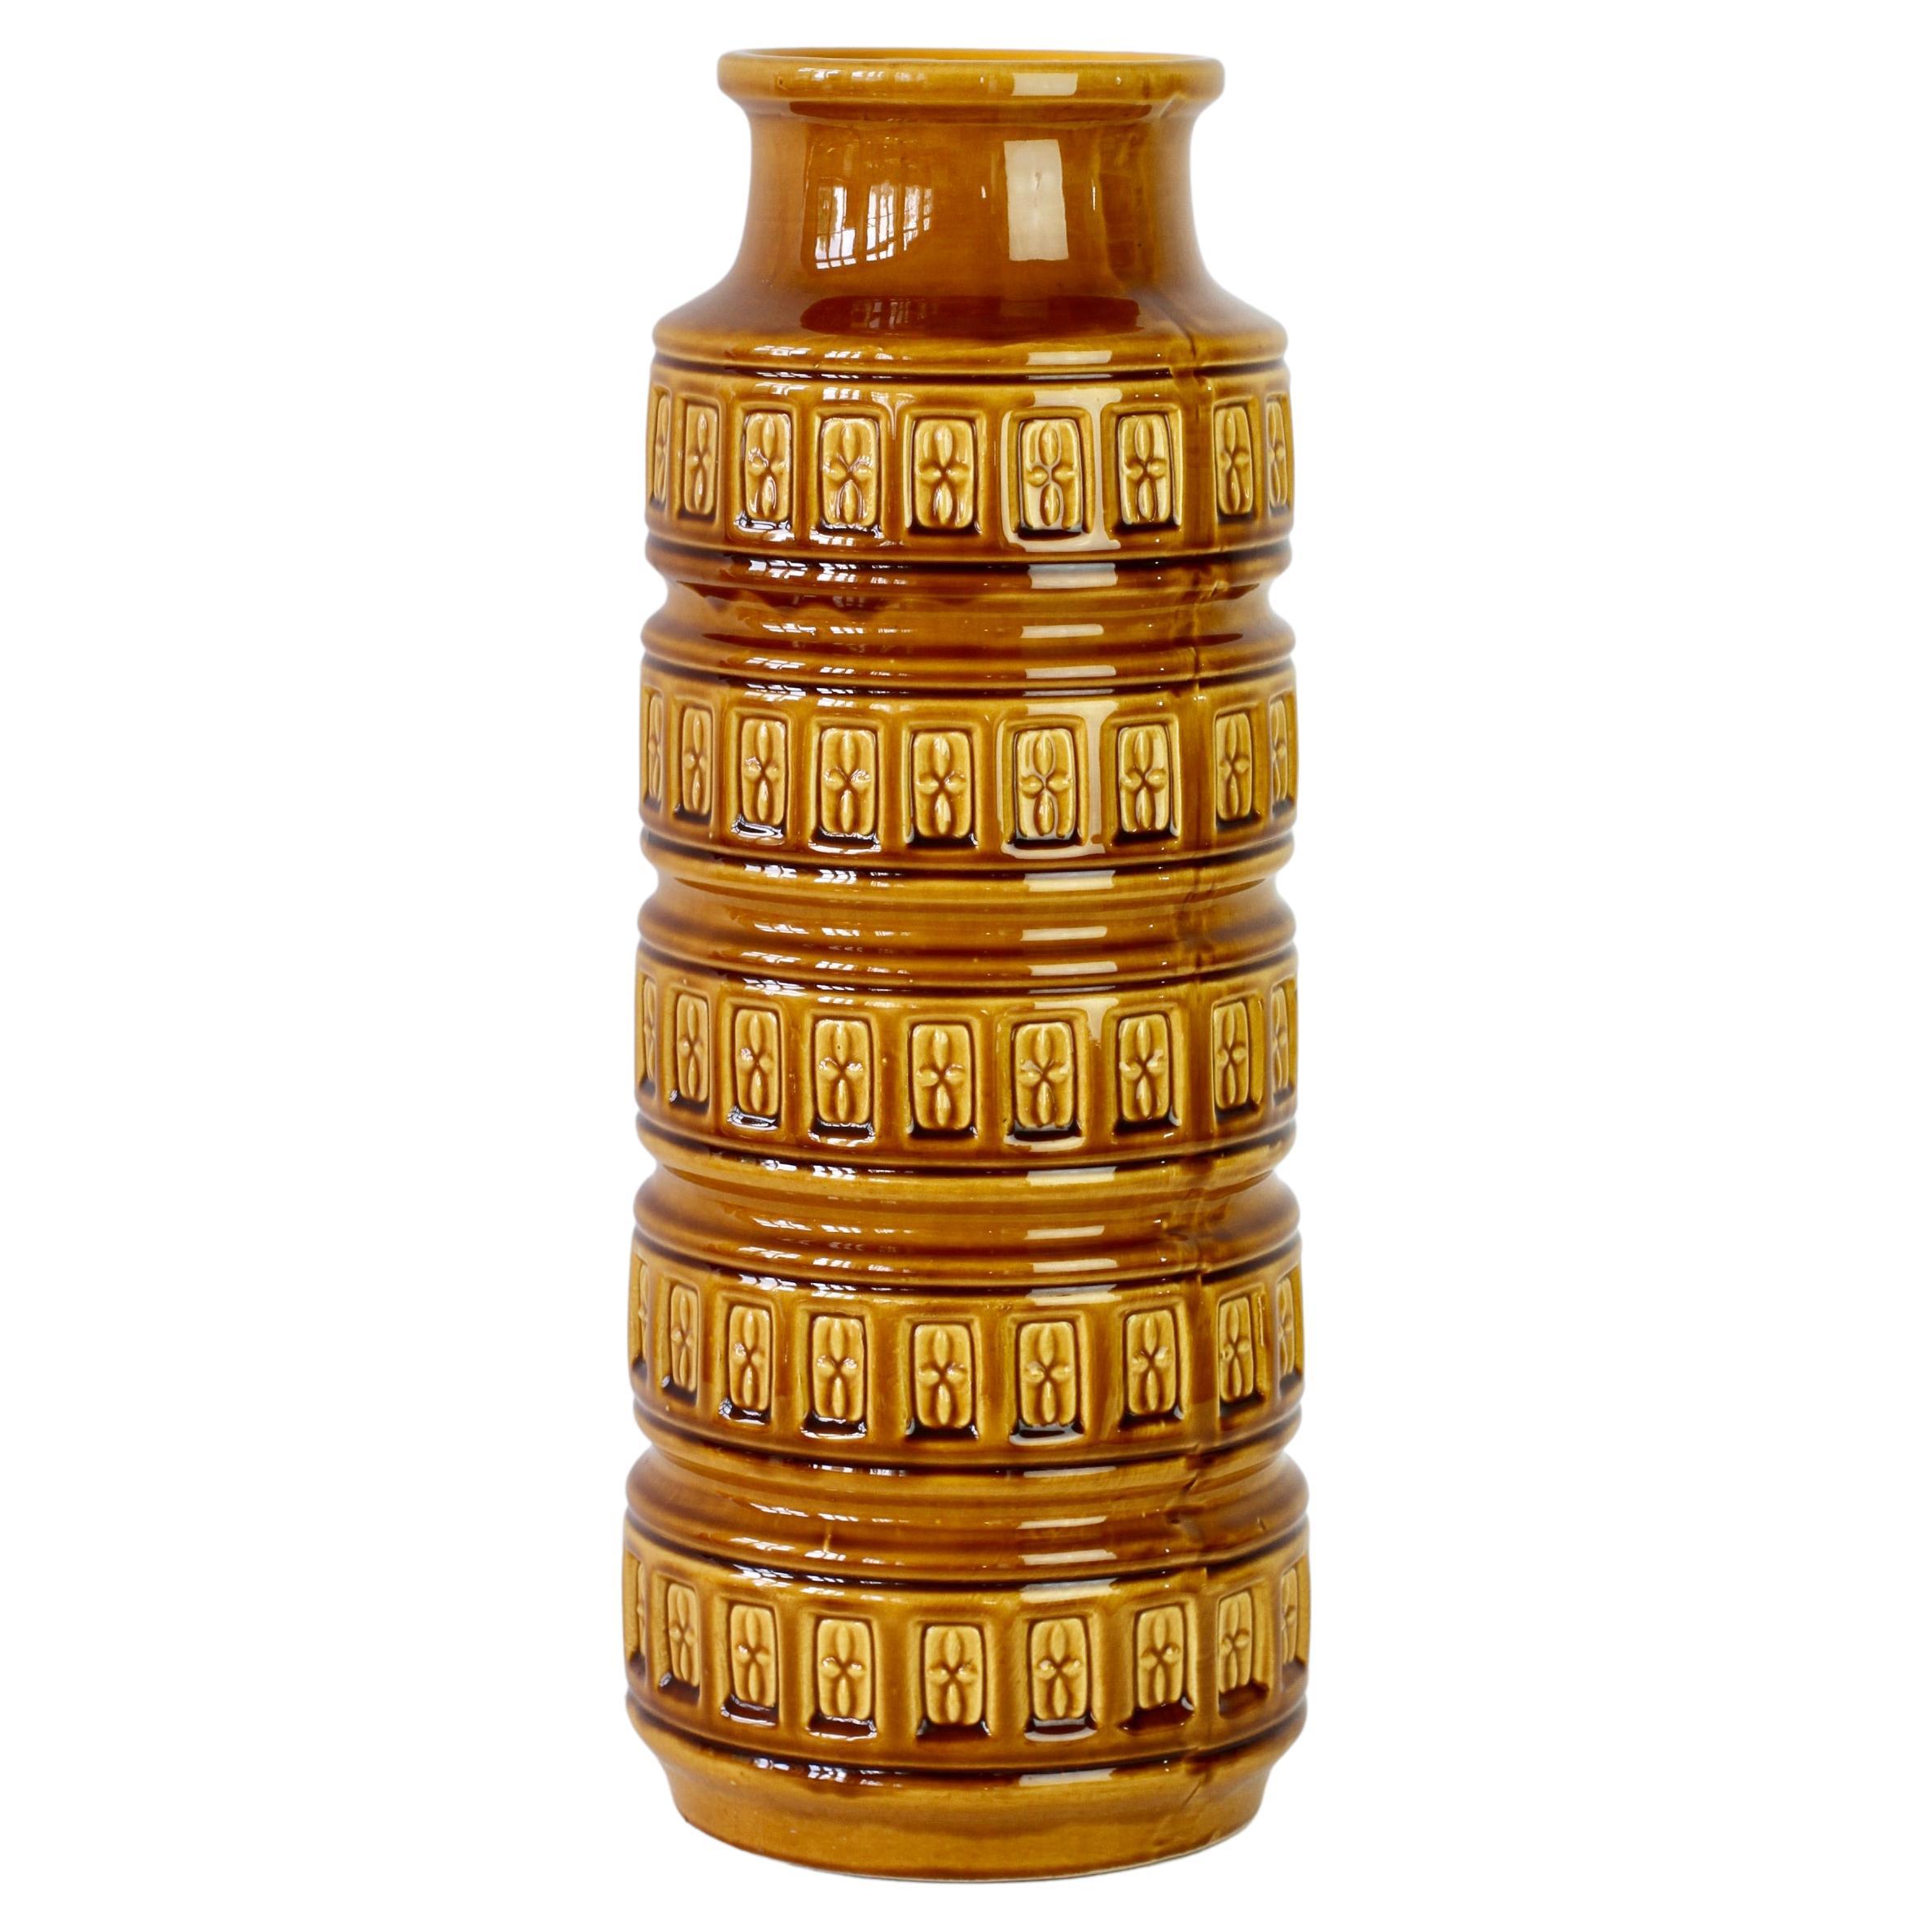 Tall, large vintage midcentury vase by West German Pottery producer - 'Bay Keramik' Germany, circa 1970s. The embossed relief pattern on the tall Bay Keramik vase is classic, 1970s with it's honey mustard yellow or amber colored glaze it's the